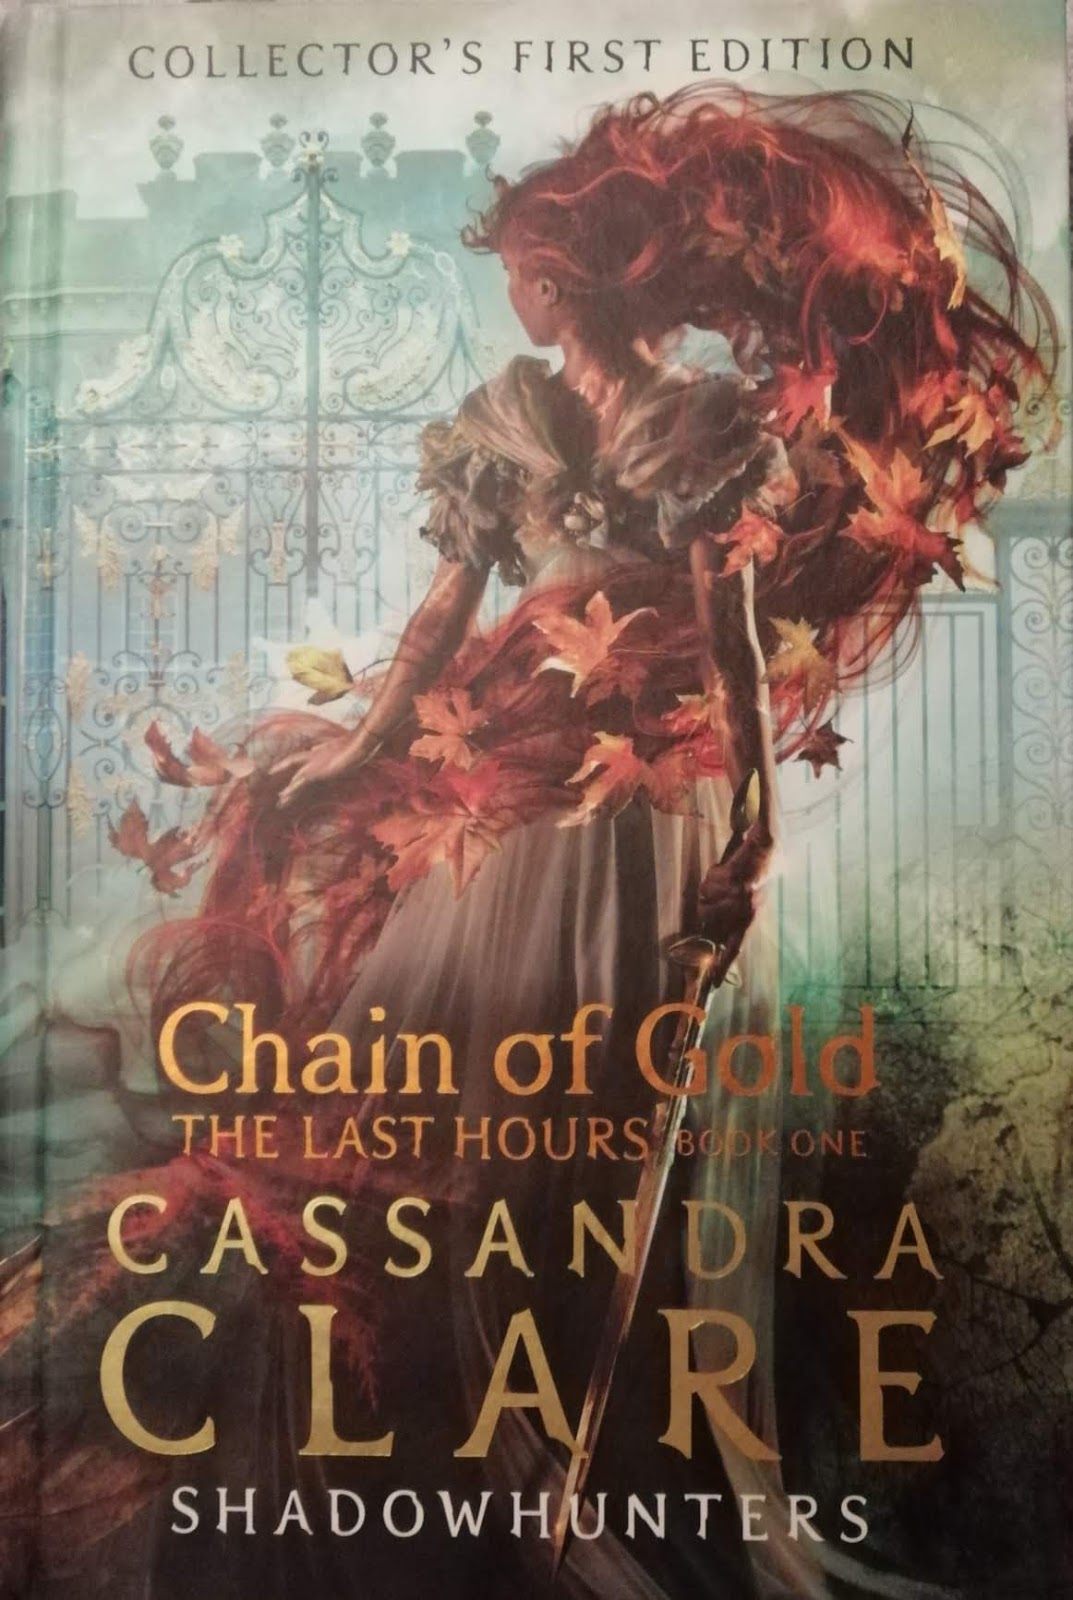 Chain of Gold (The Last Hours, #1) by Cassandra Clare